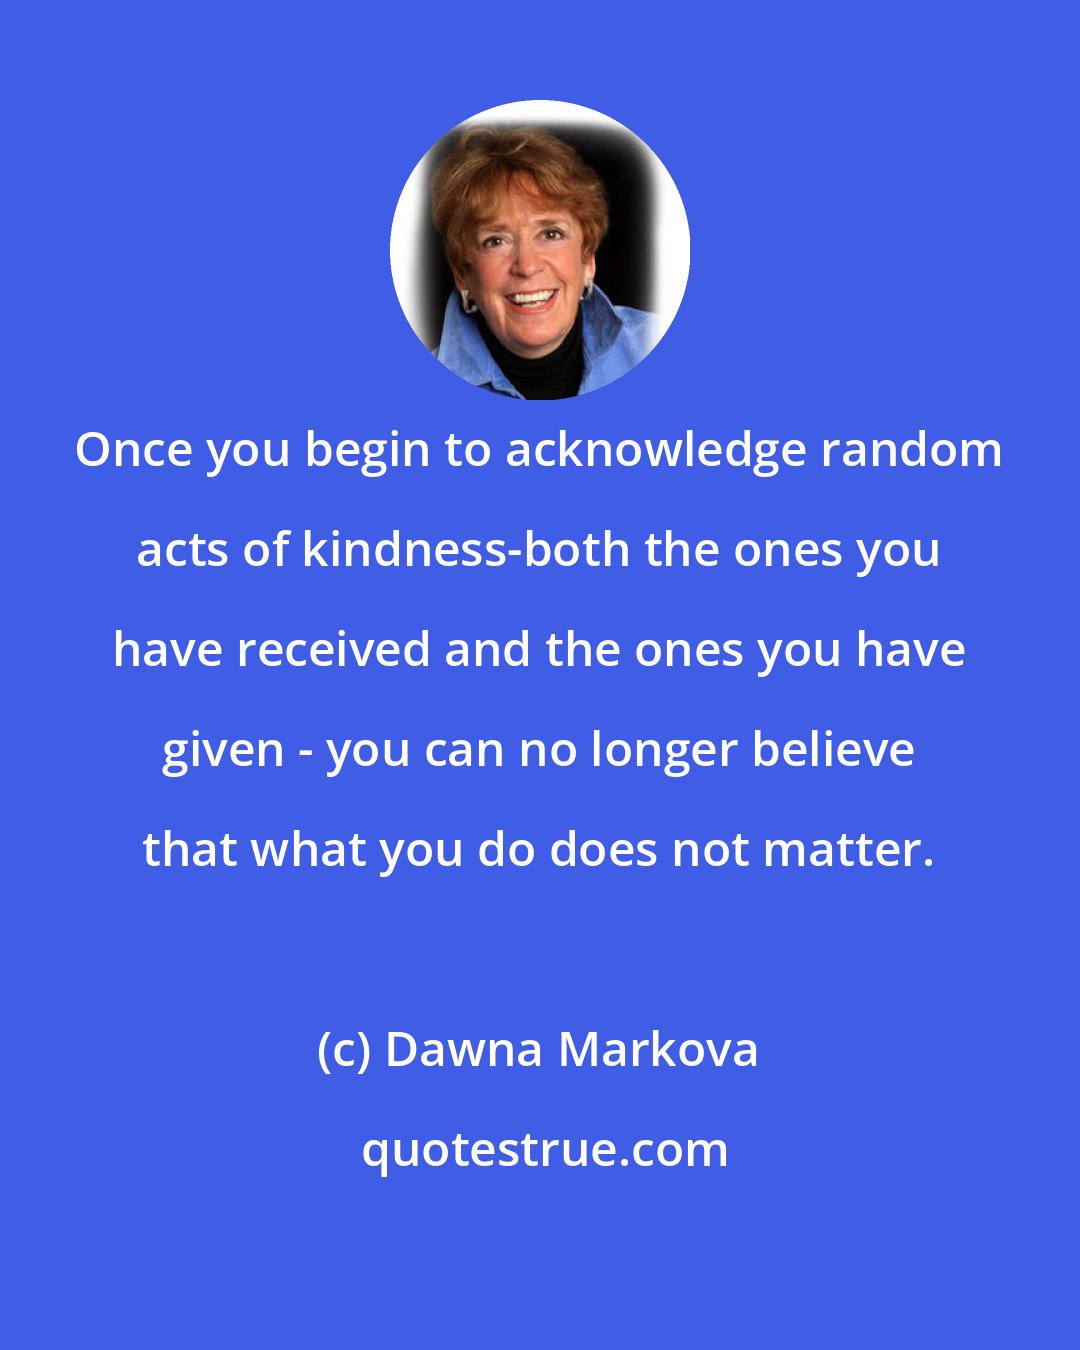 Dawna Markova: Once you begin to acknowledge random acts of kindness-both the ones you have received and the ones you have given - you can no longer believe that what you do does not matter.